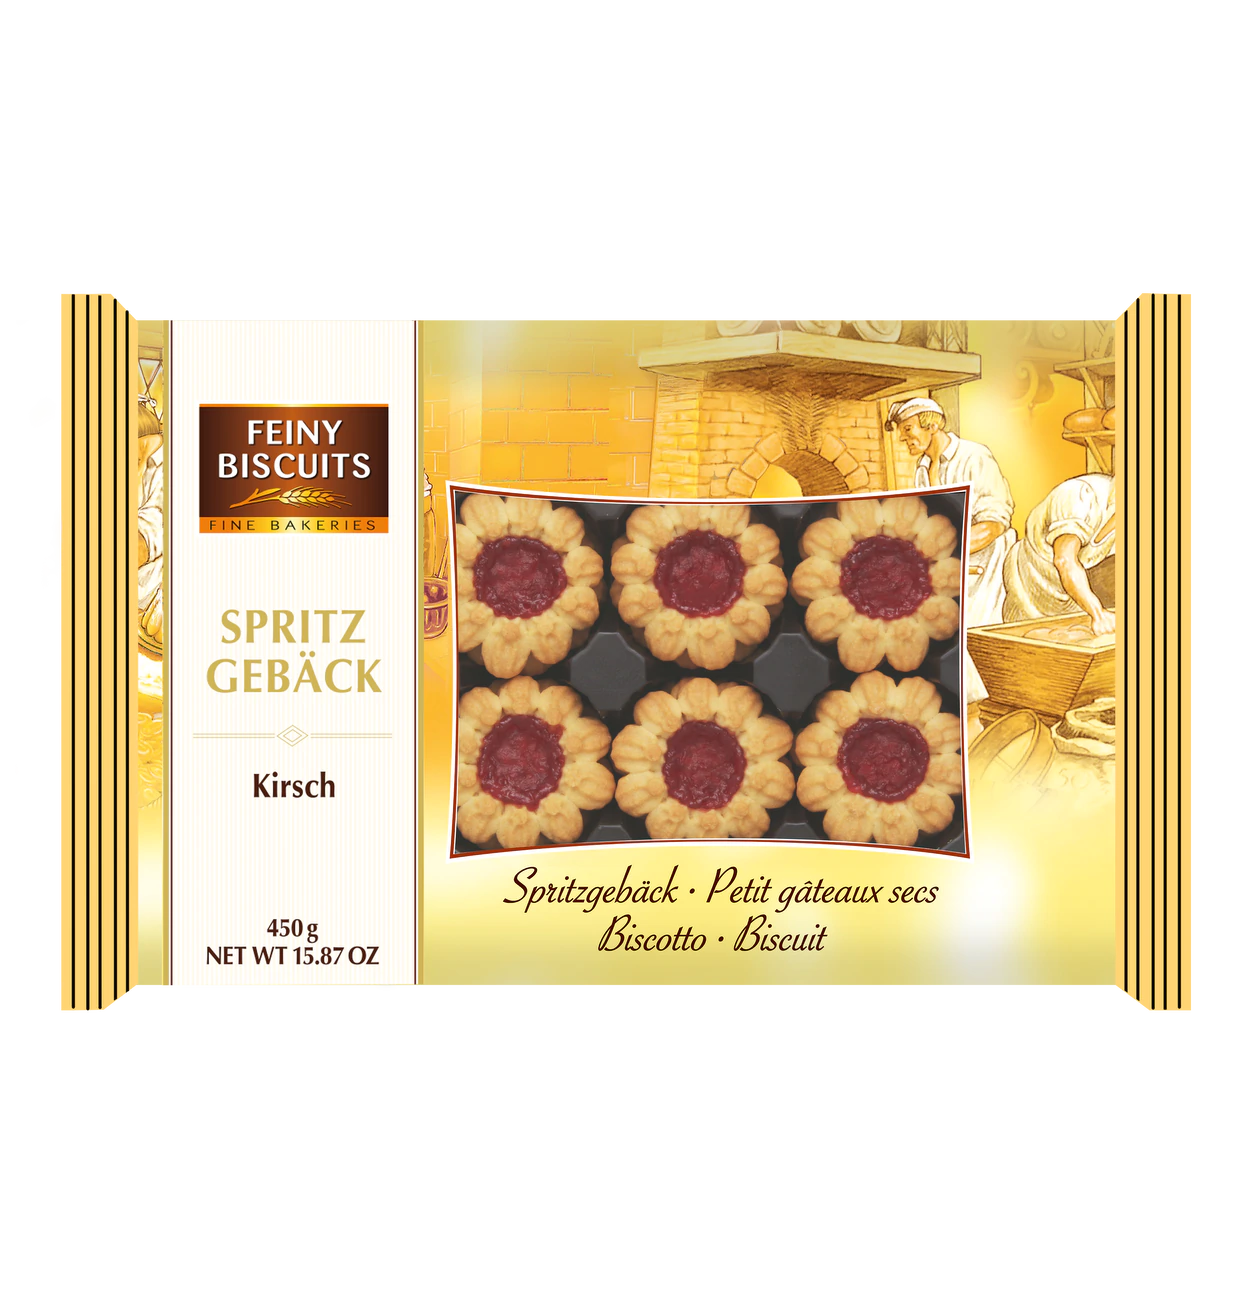 Crispy biscuit with sour cherry flavoured stuffing (12 x 450g)